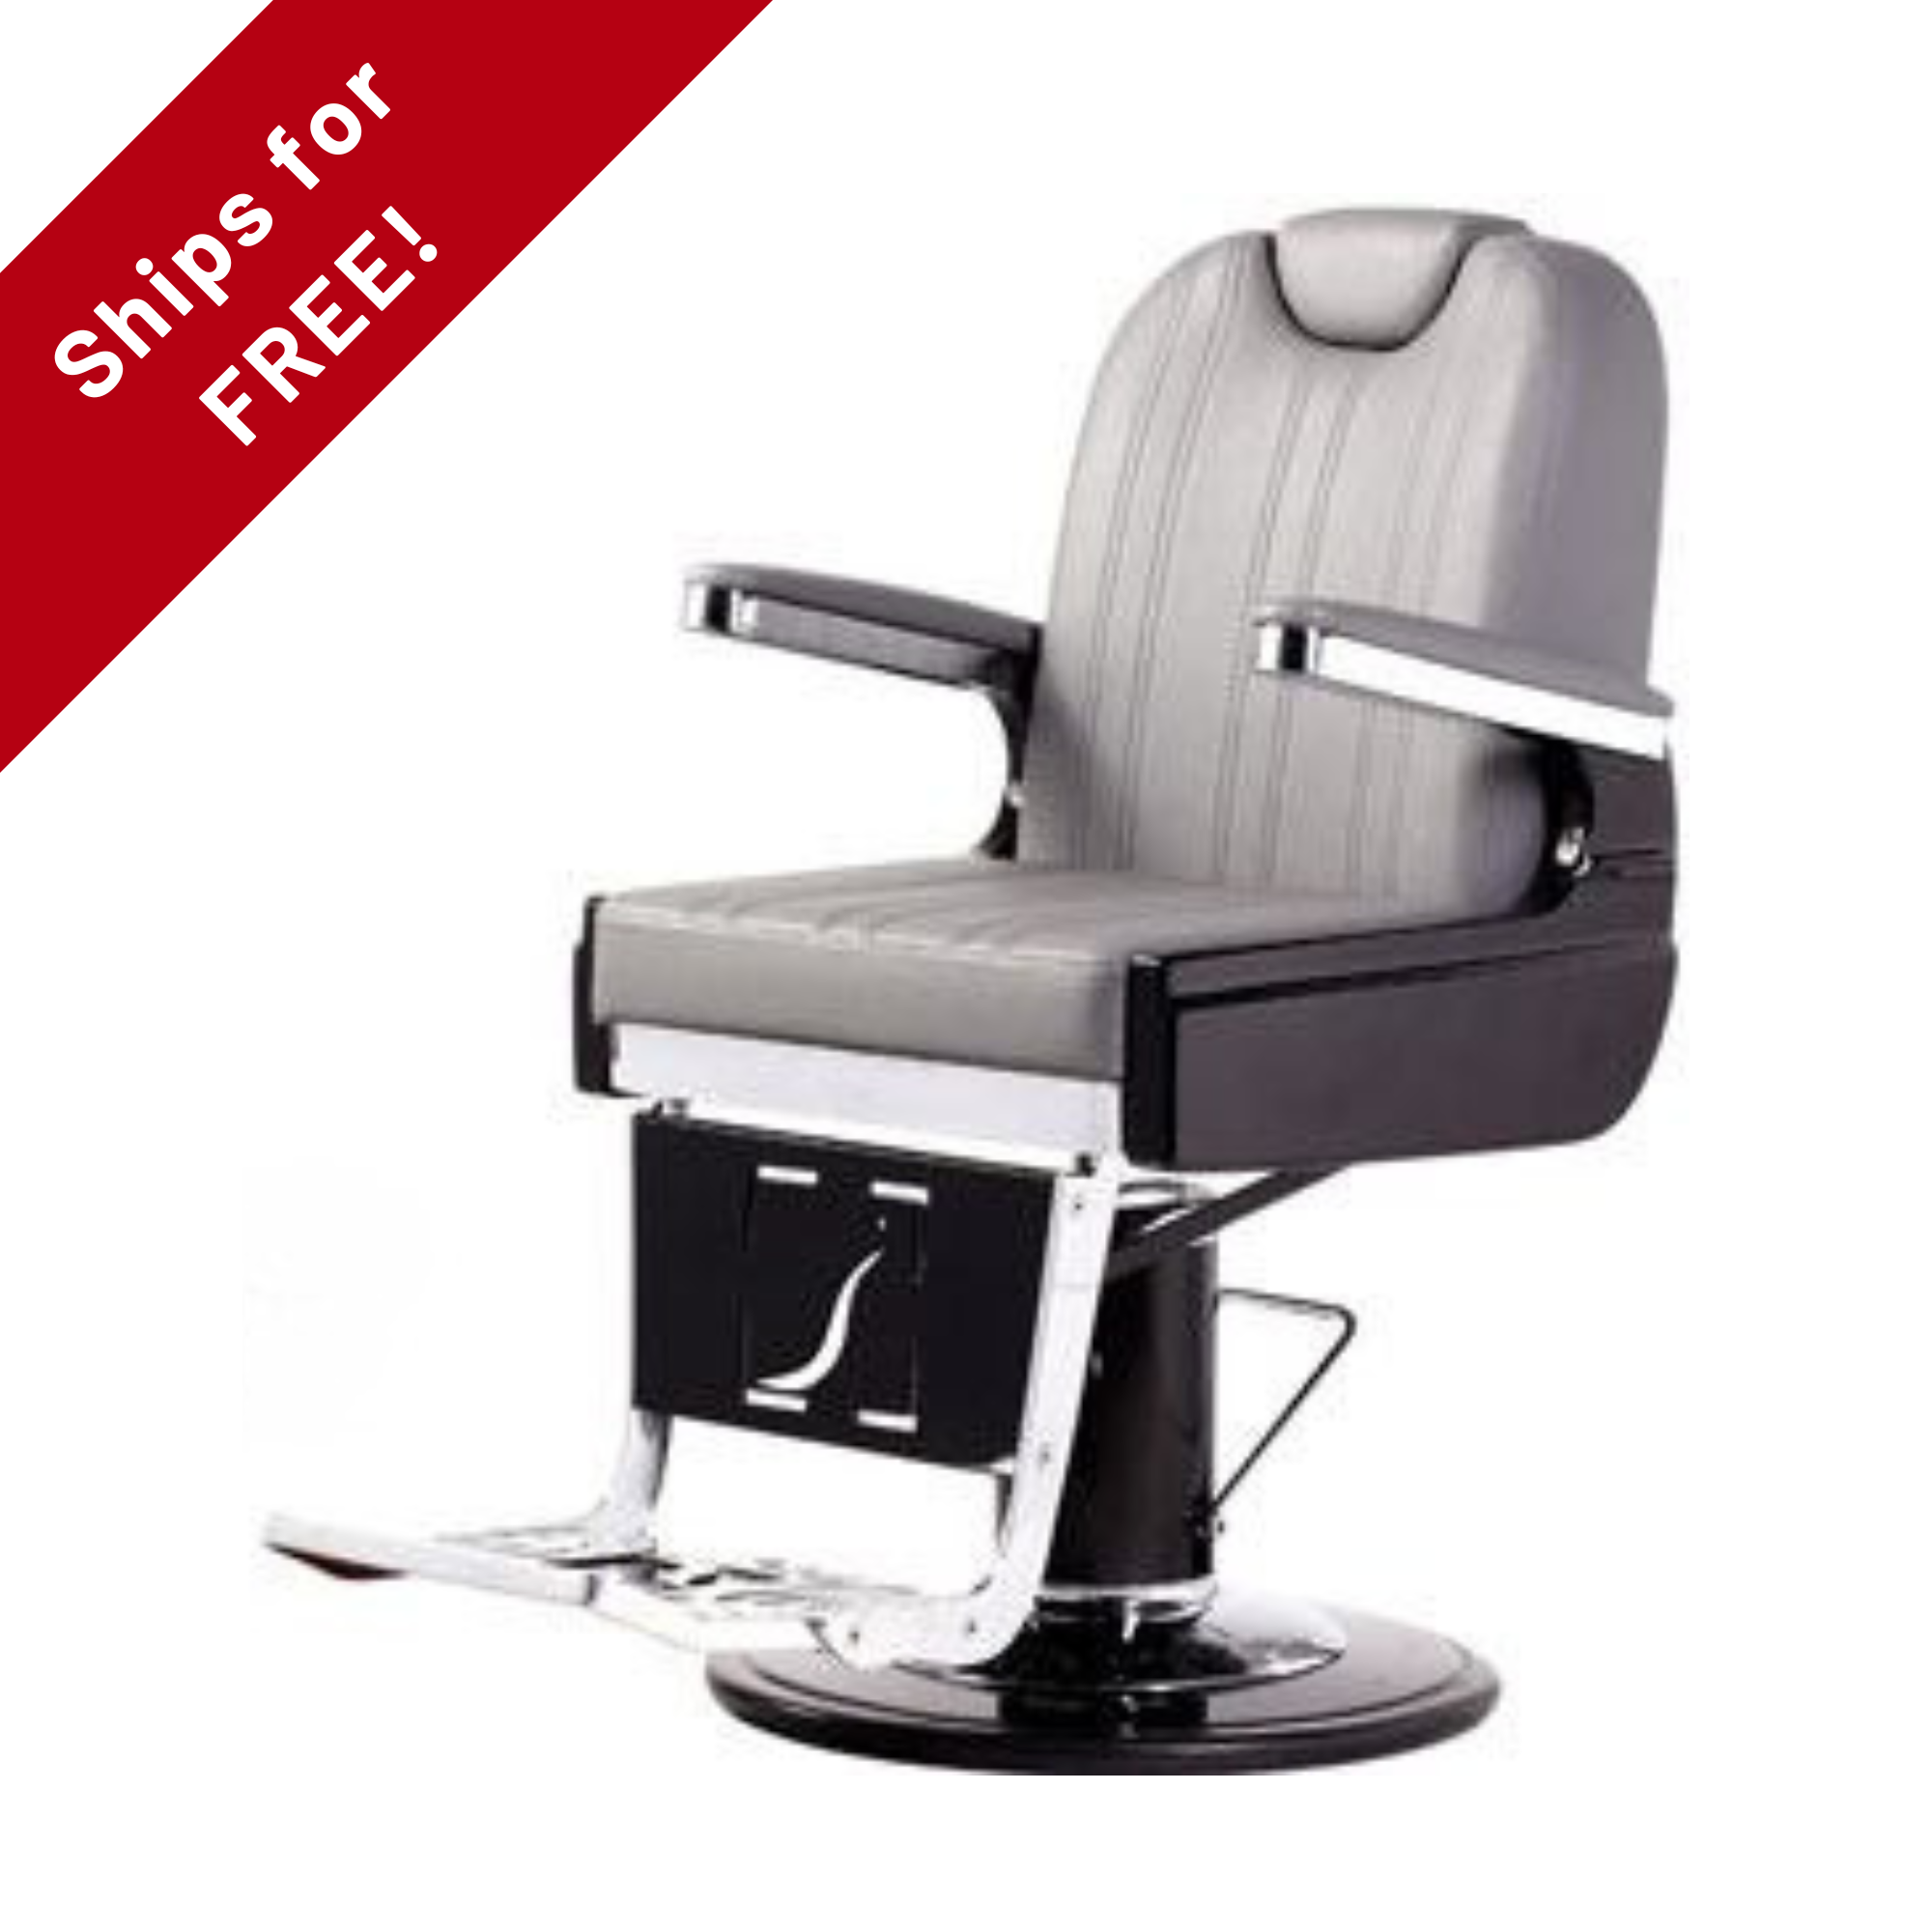 Confort Eco Barber Chair, Cream Upholstery